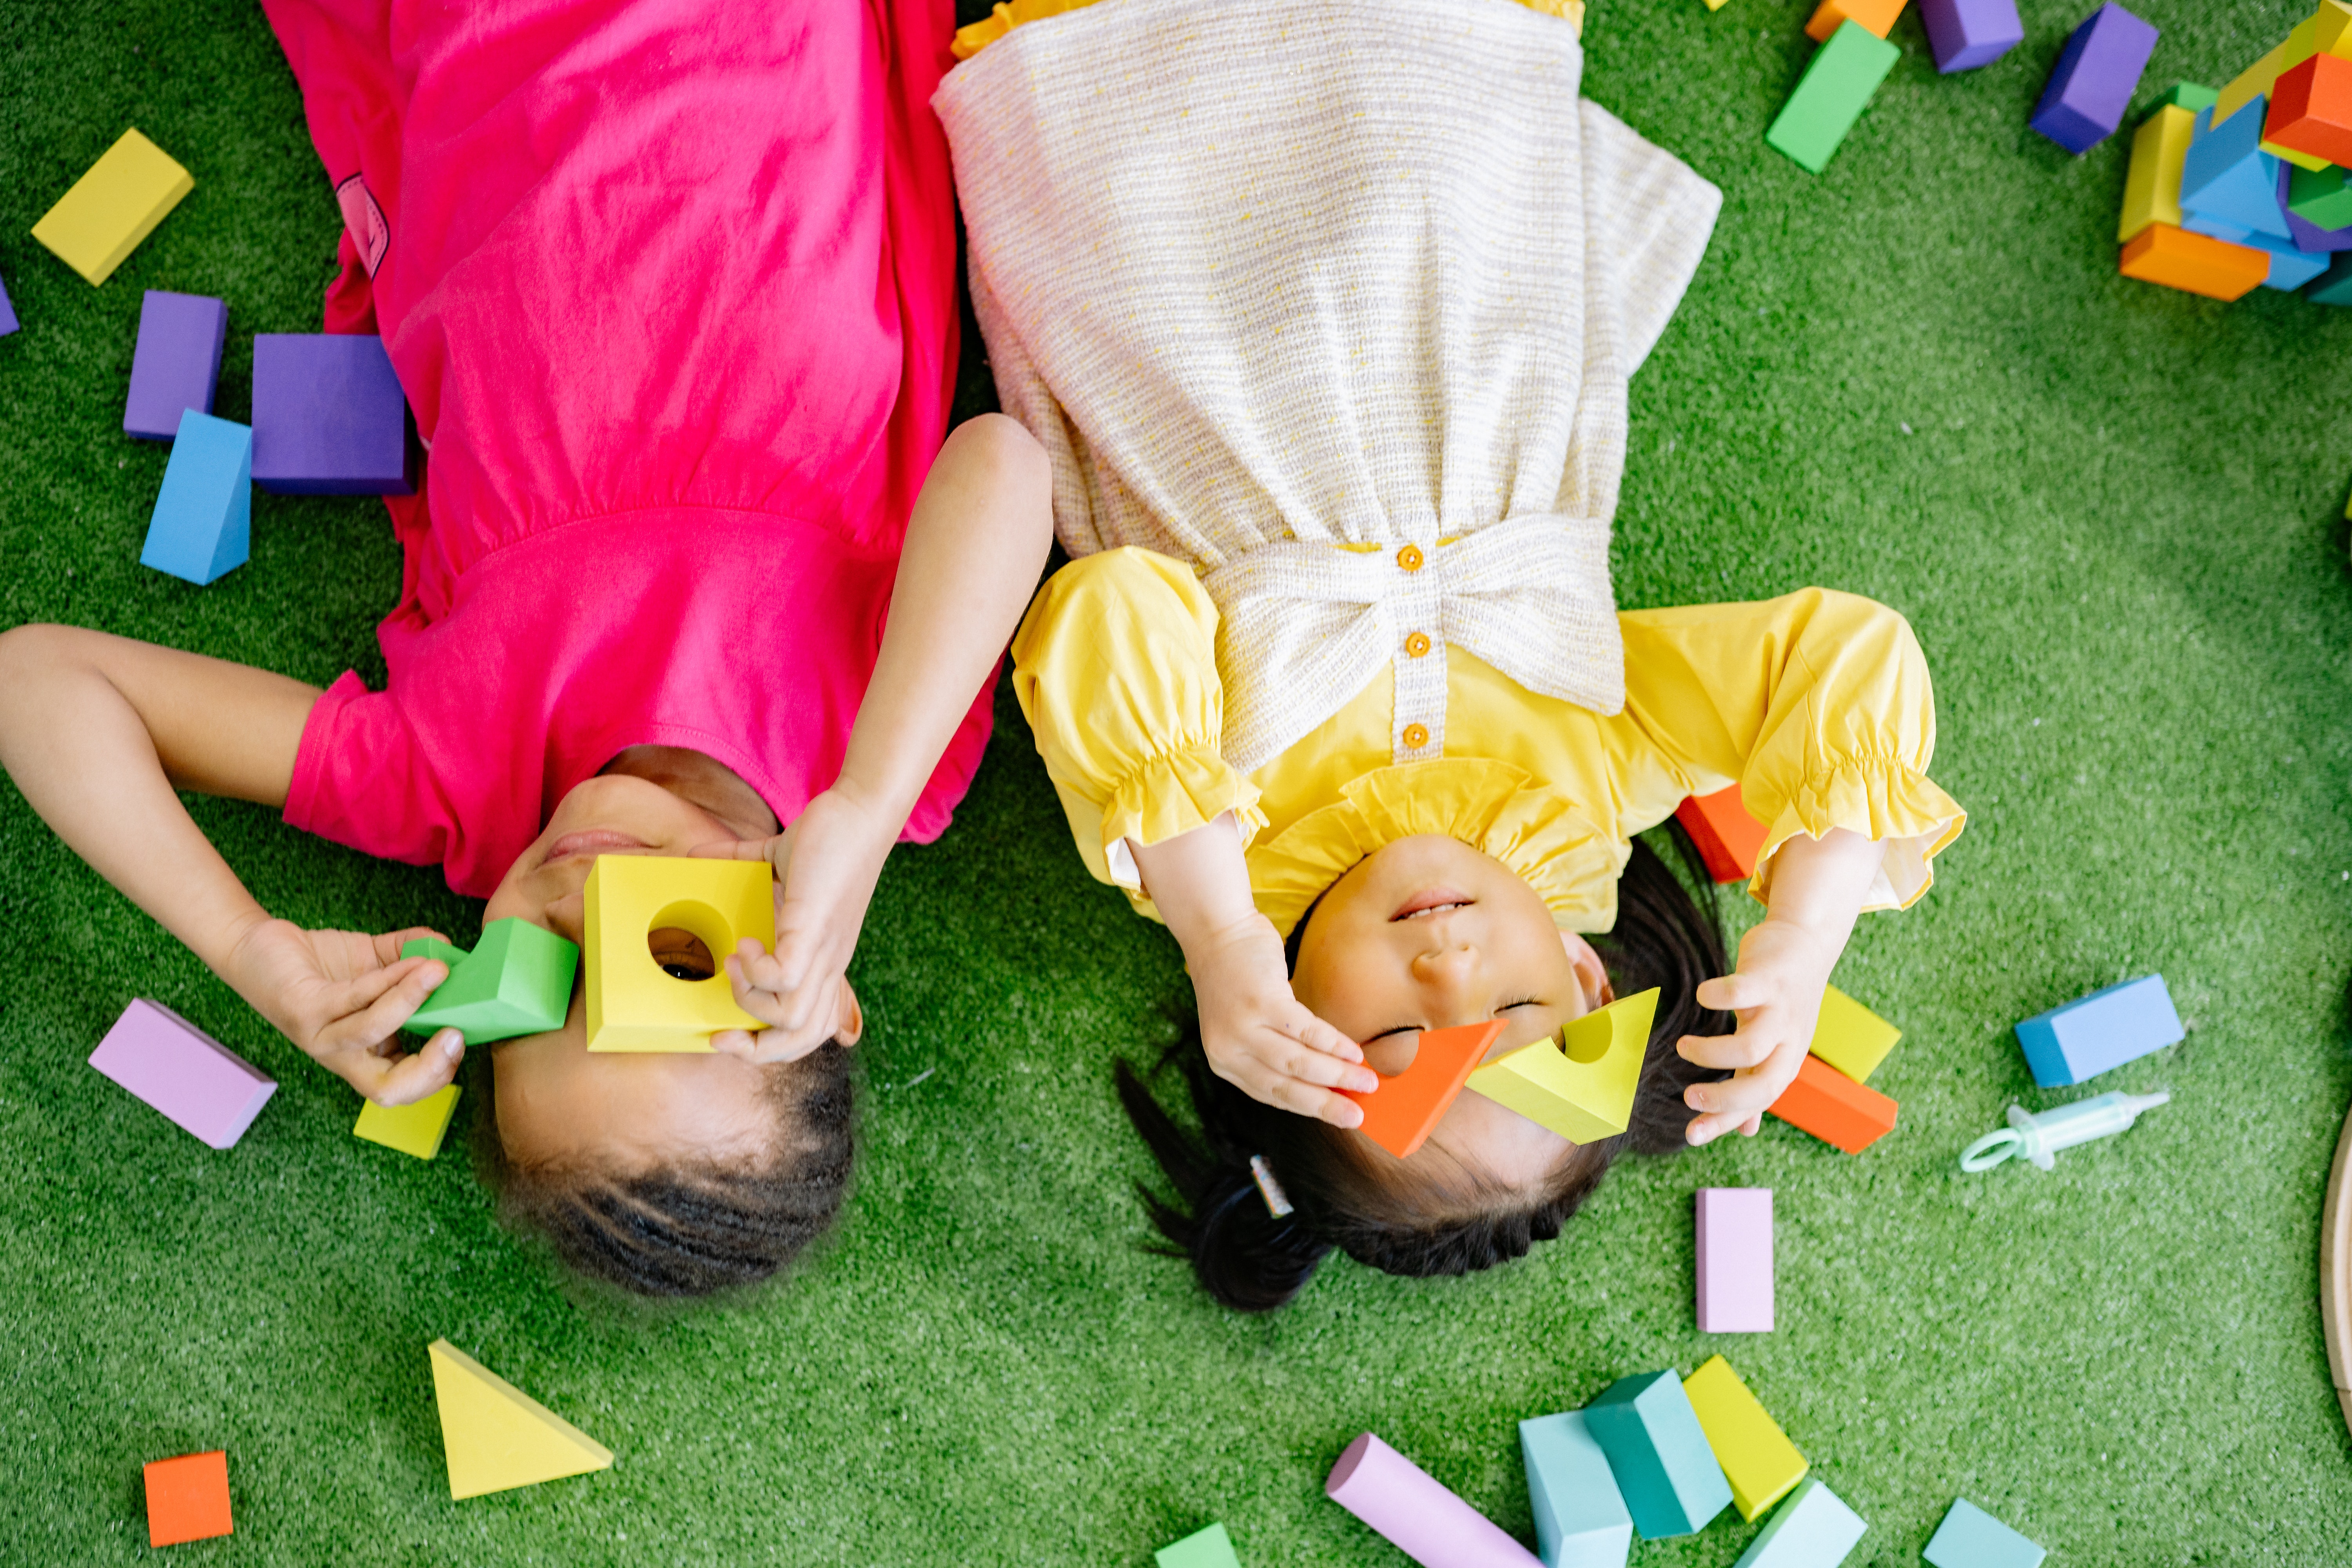 Girls Lying Down On Green Carpet Playing With Wooden Blocks